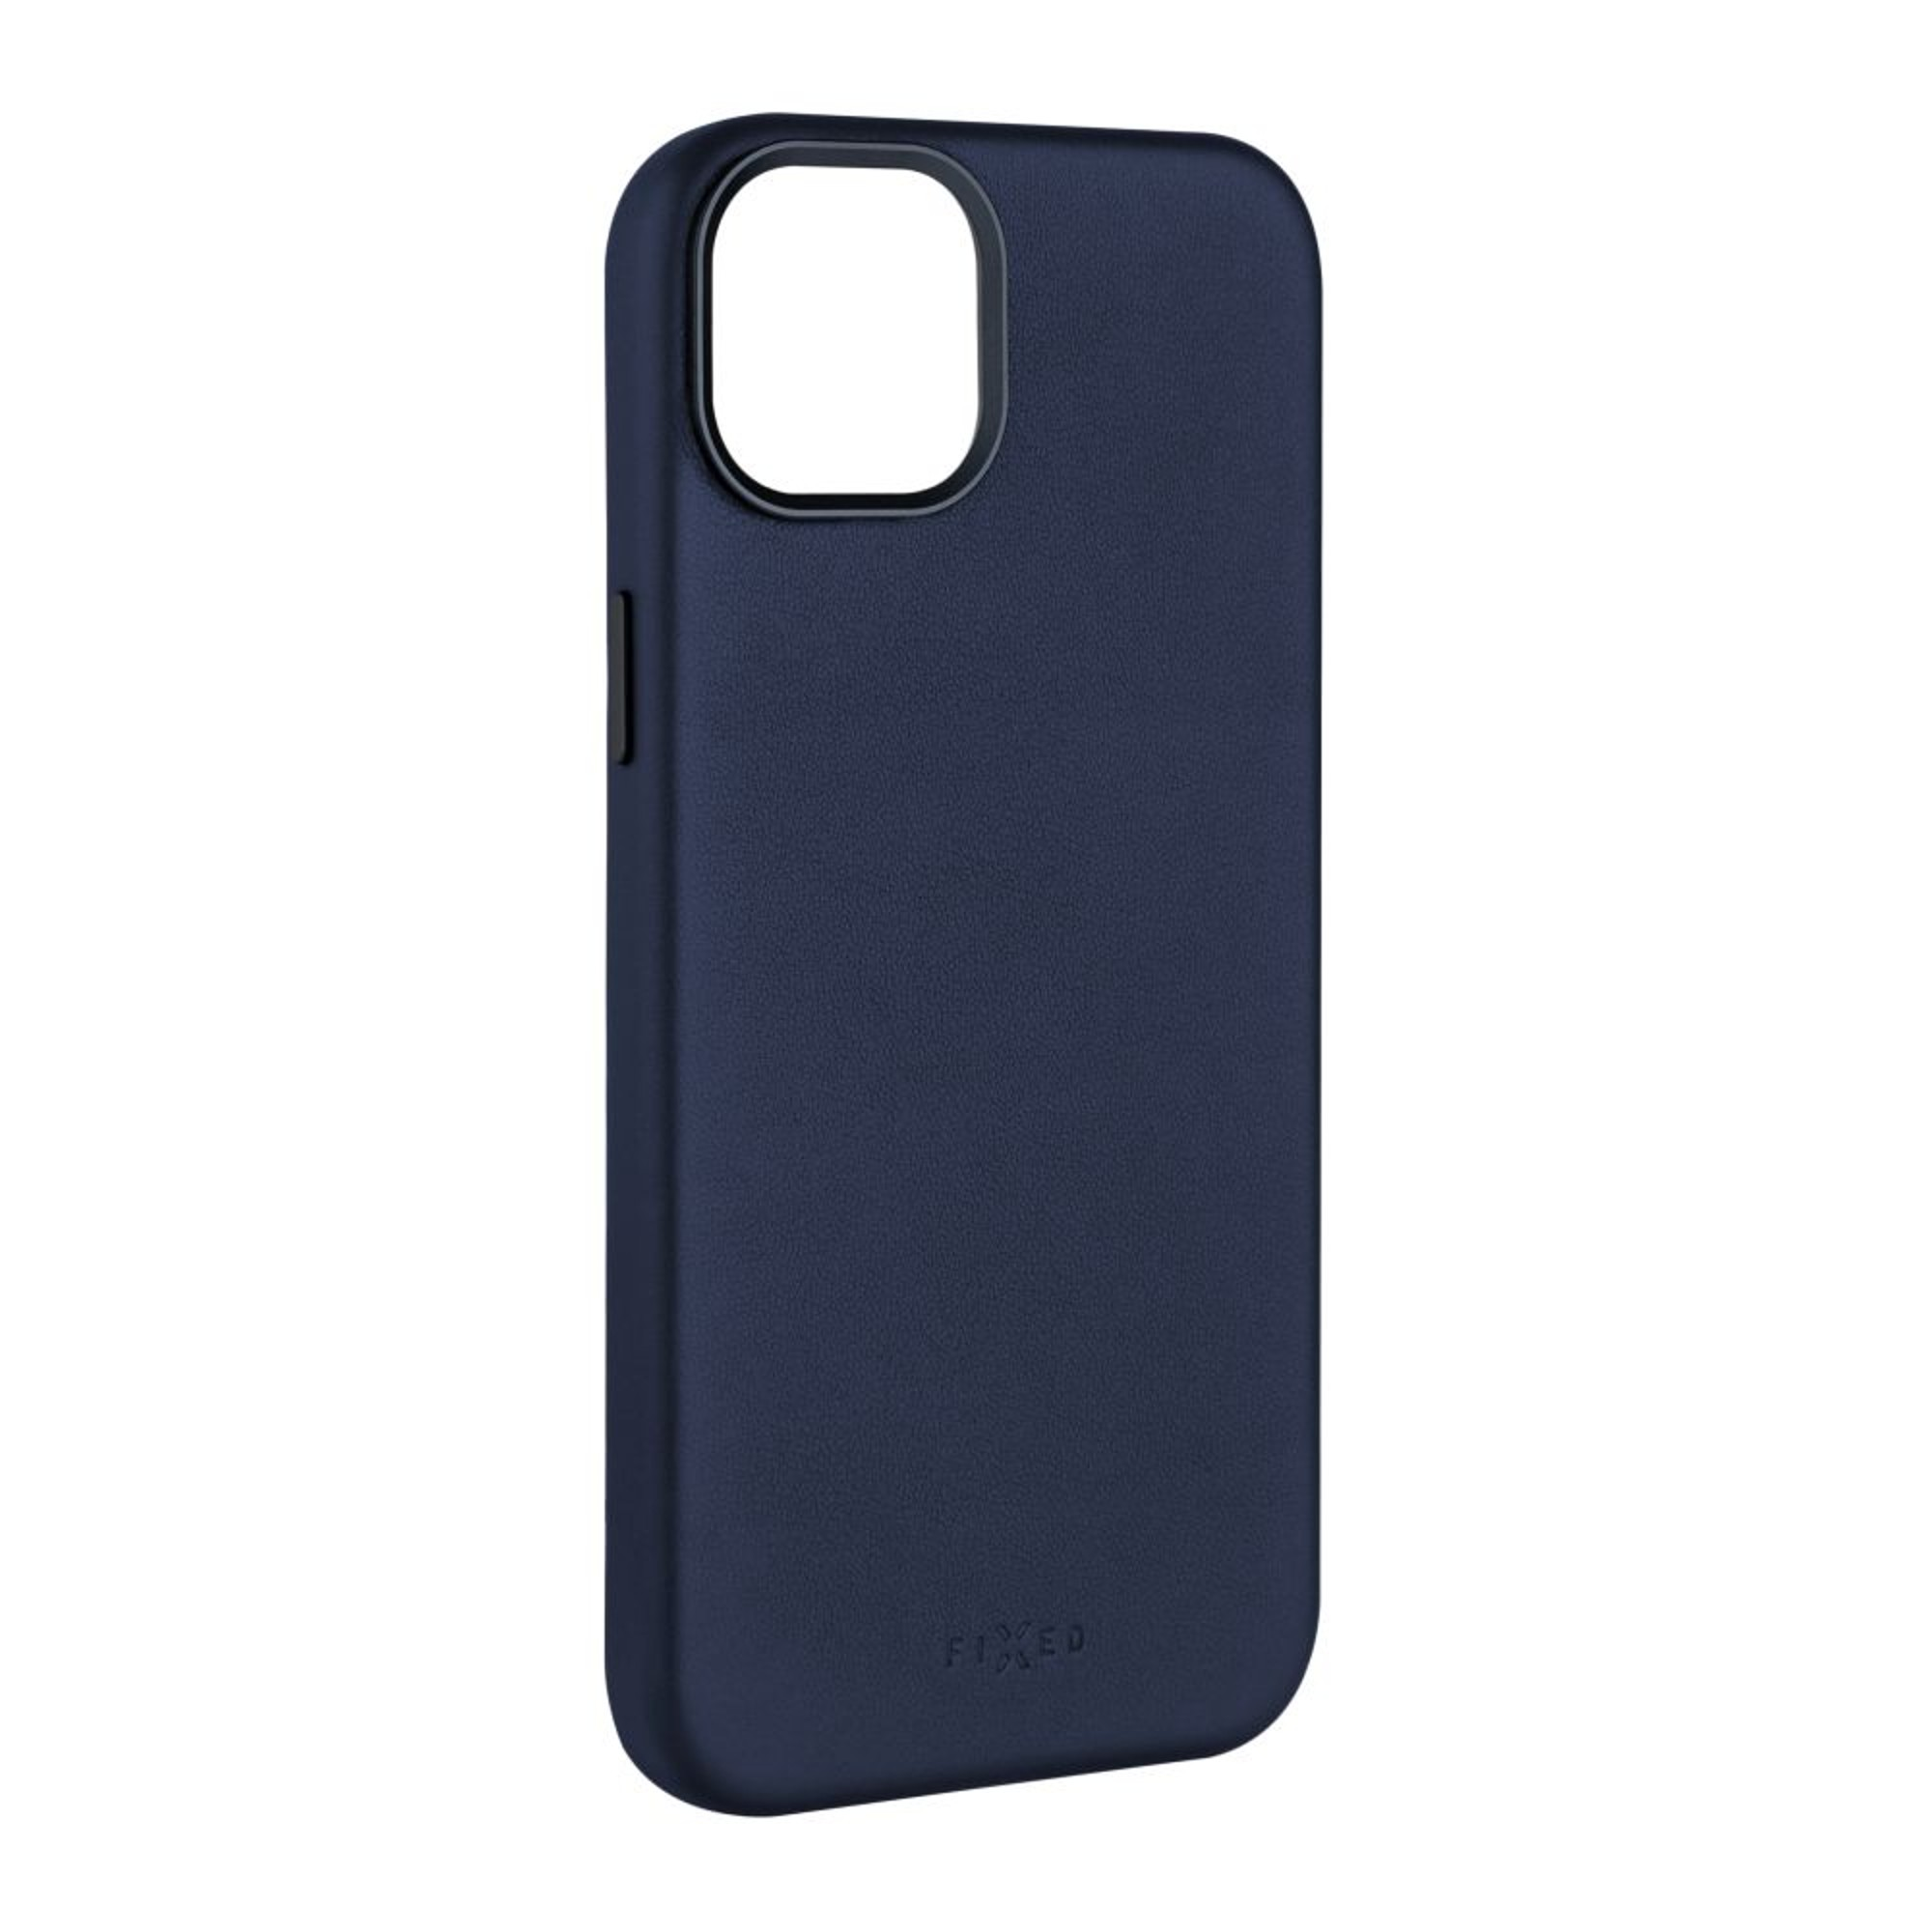 Apple, Backcover, Blau FIXED iPhone 13, FIXLM-723-BL,